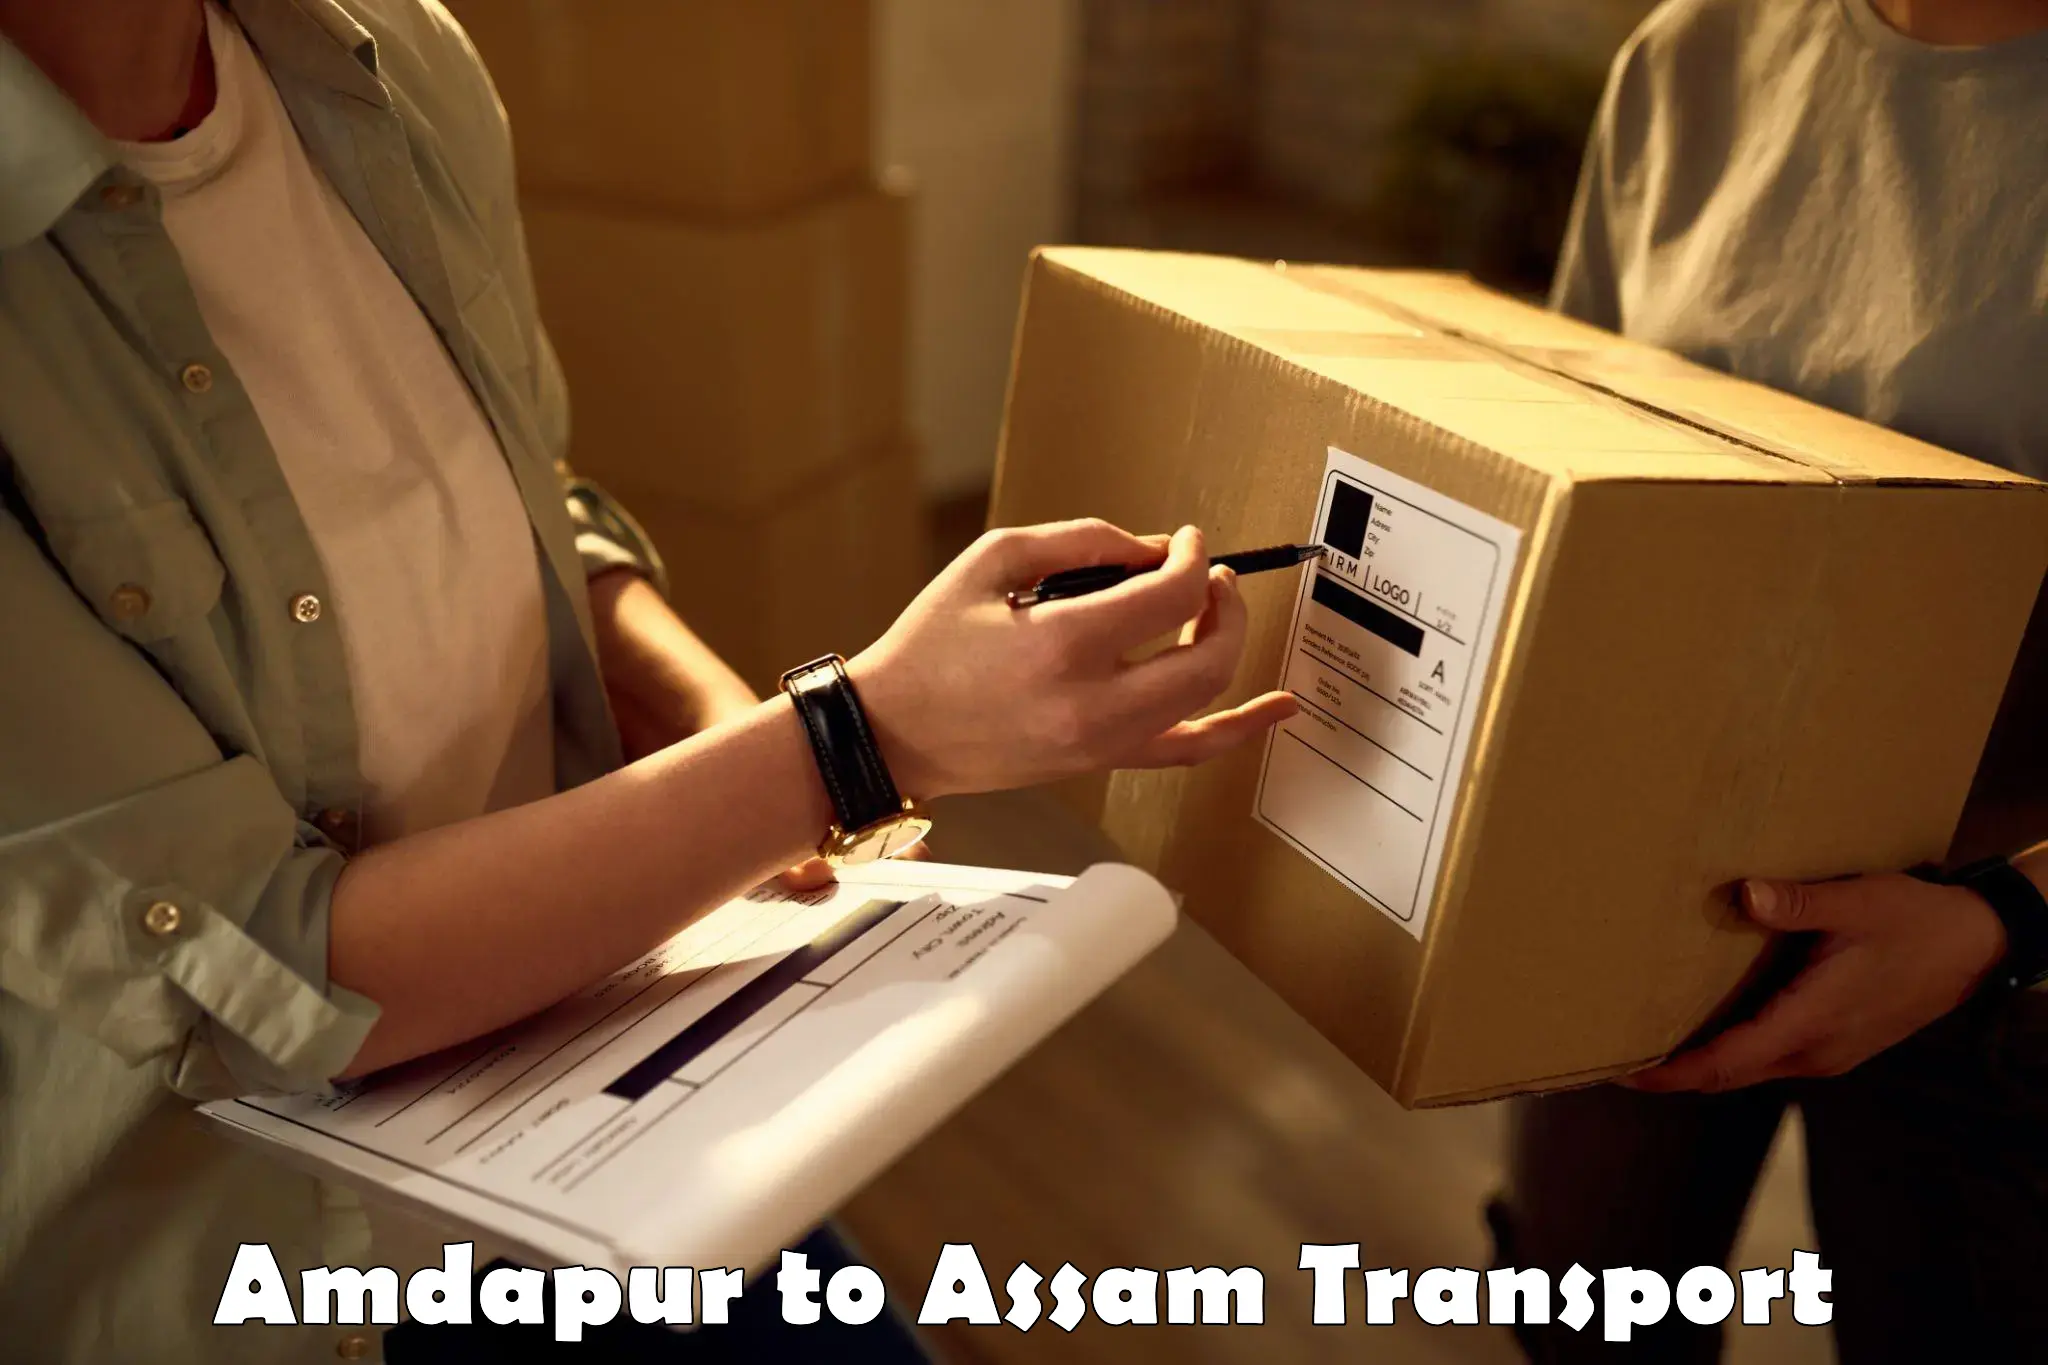 Delivery service Amdapur to Guwahati University